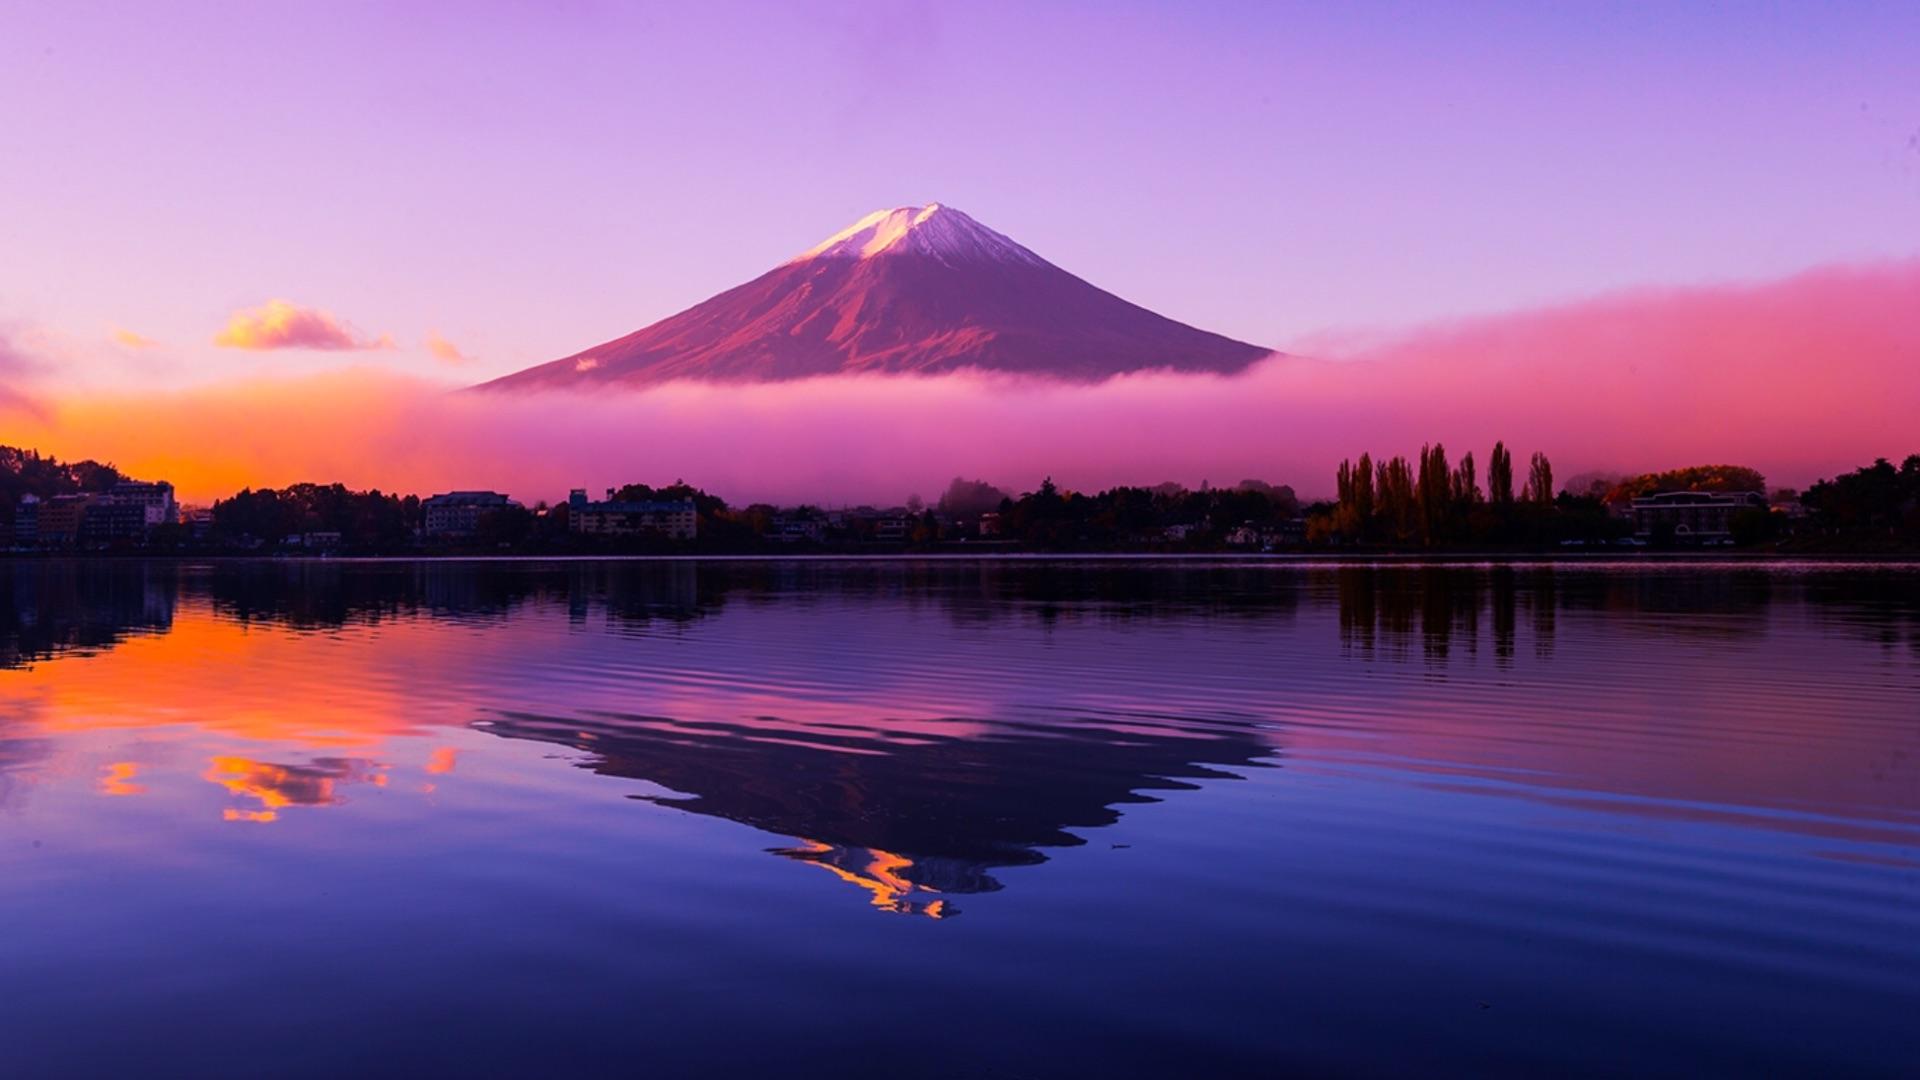 Mt. Fuji viewed from the opposite side of a lake during